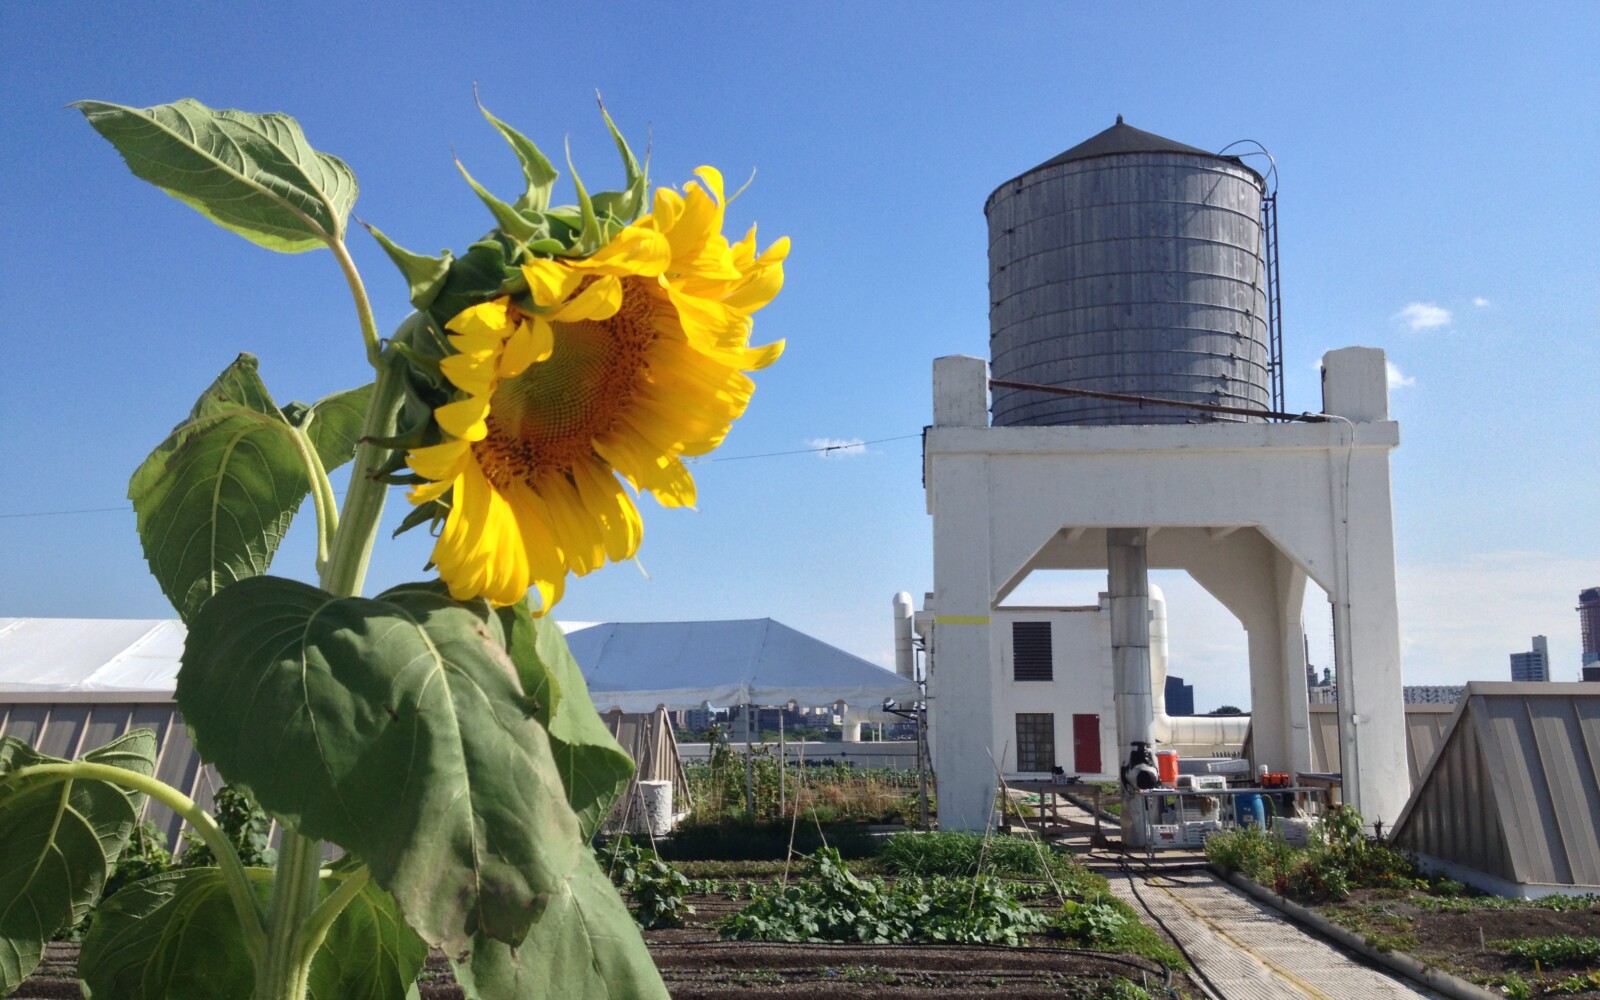 A bright yellow sunflower on a sunny, clear day with a soil-based farm and a big water tower in the background.